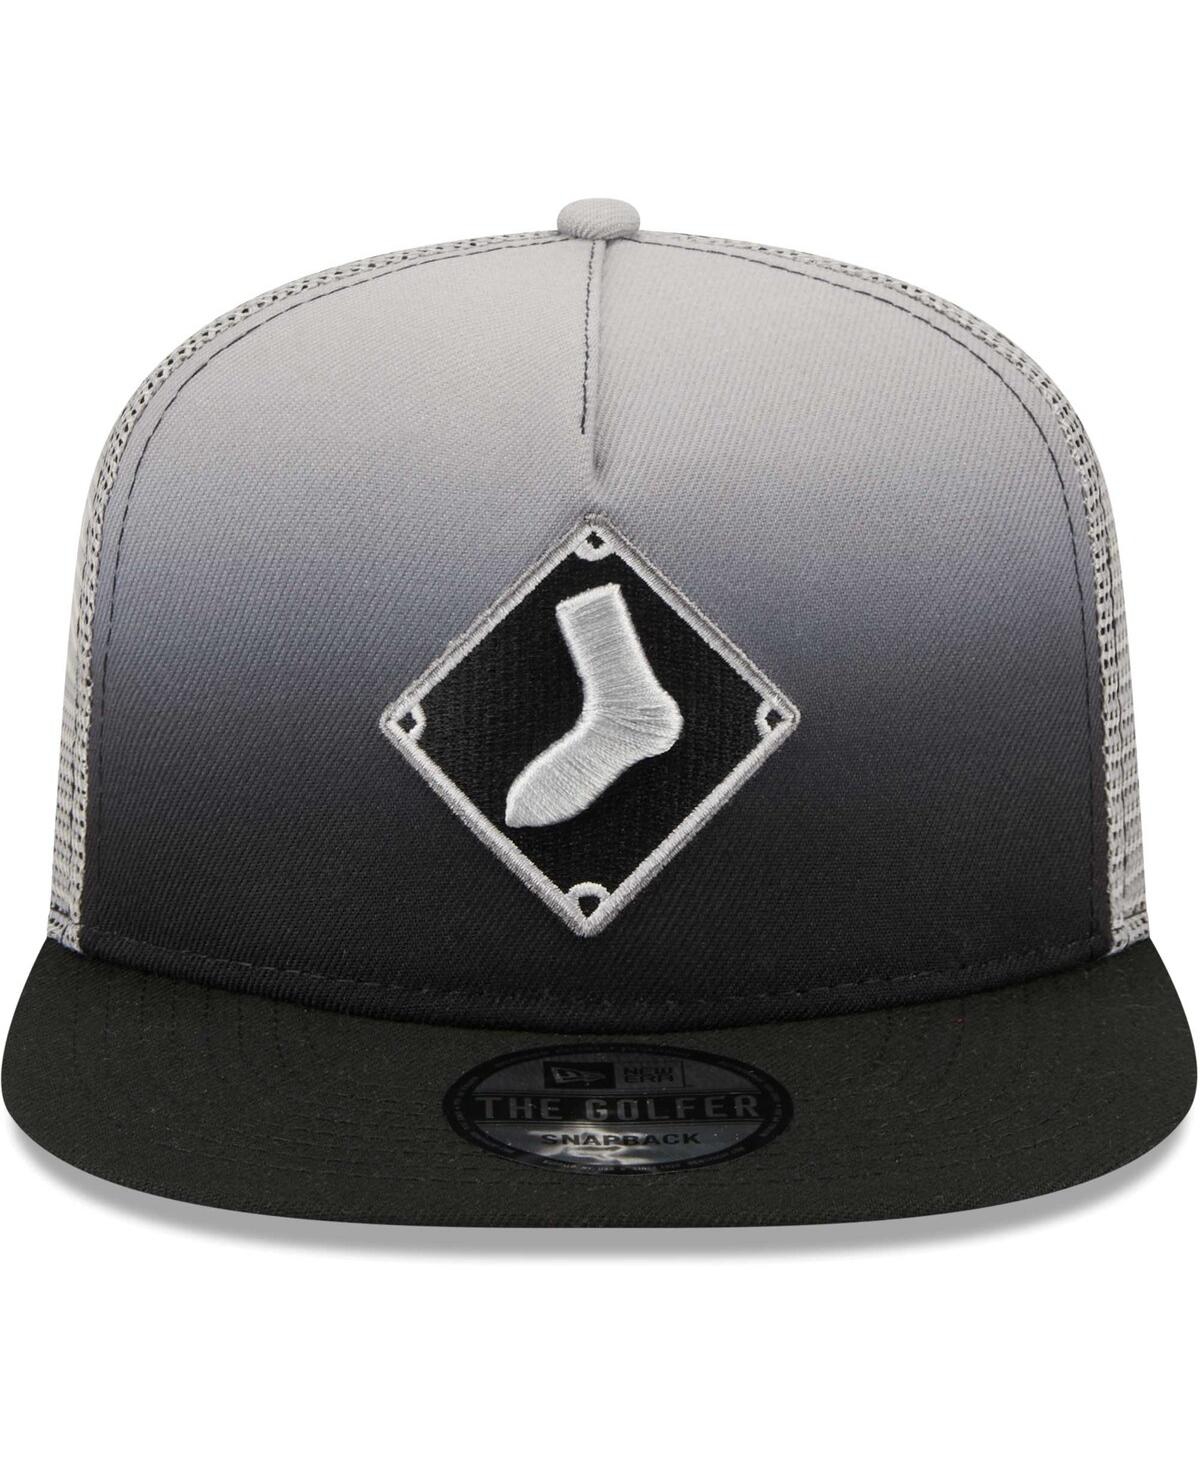 Men's Black, Gray Chicago White Sox City Arch 9FIFTY Snapback Hat